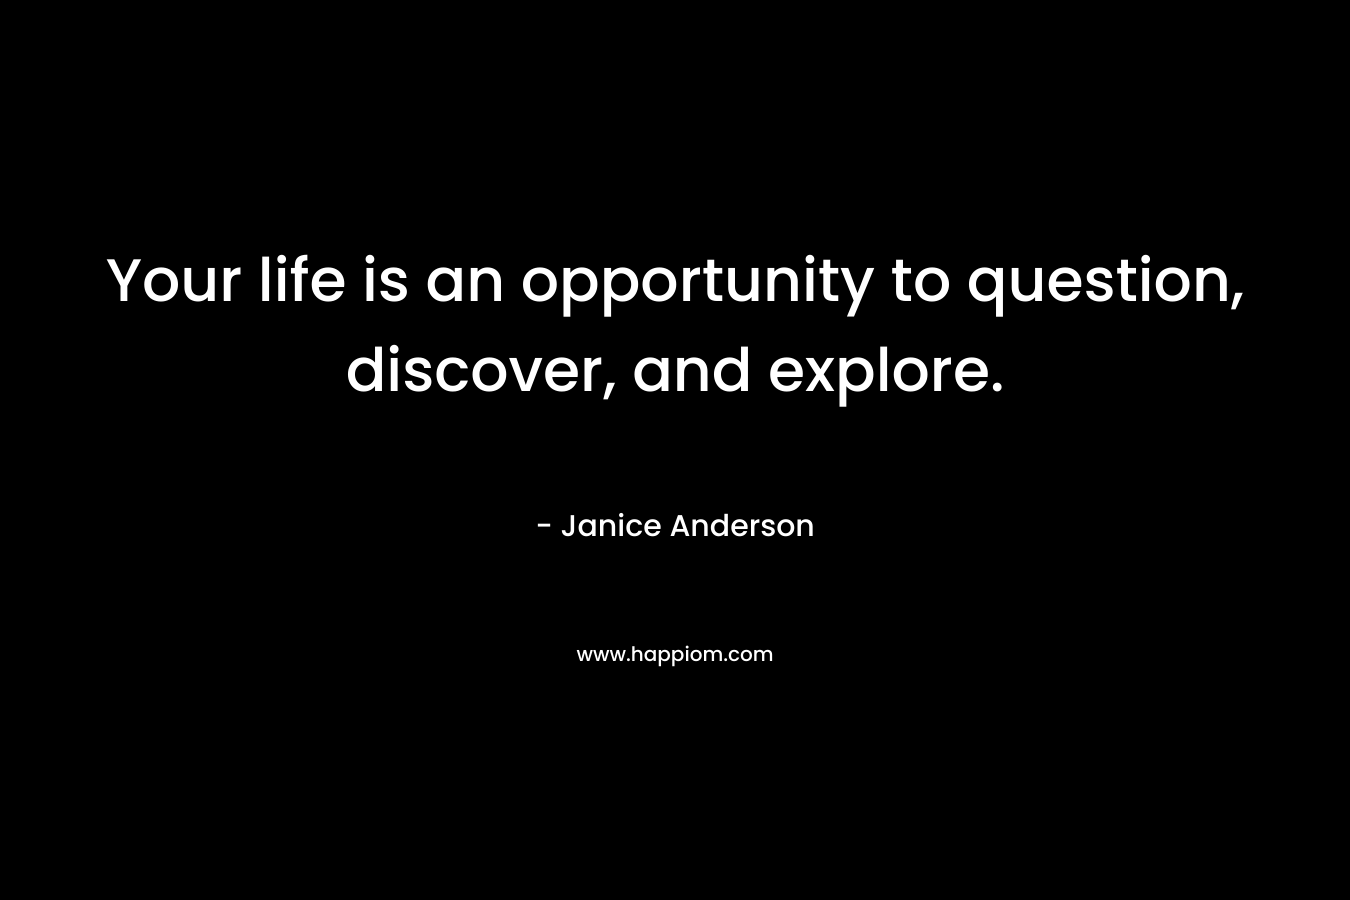 Your life is an opportunity to question, discover, and explore.